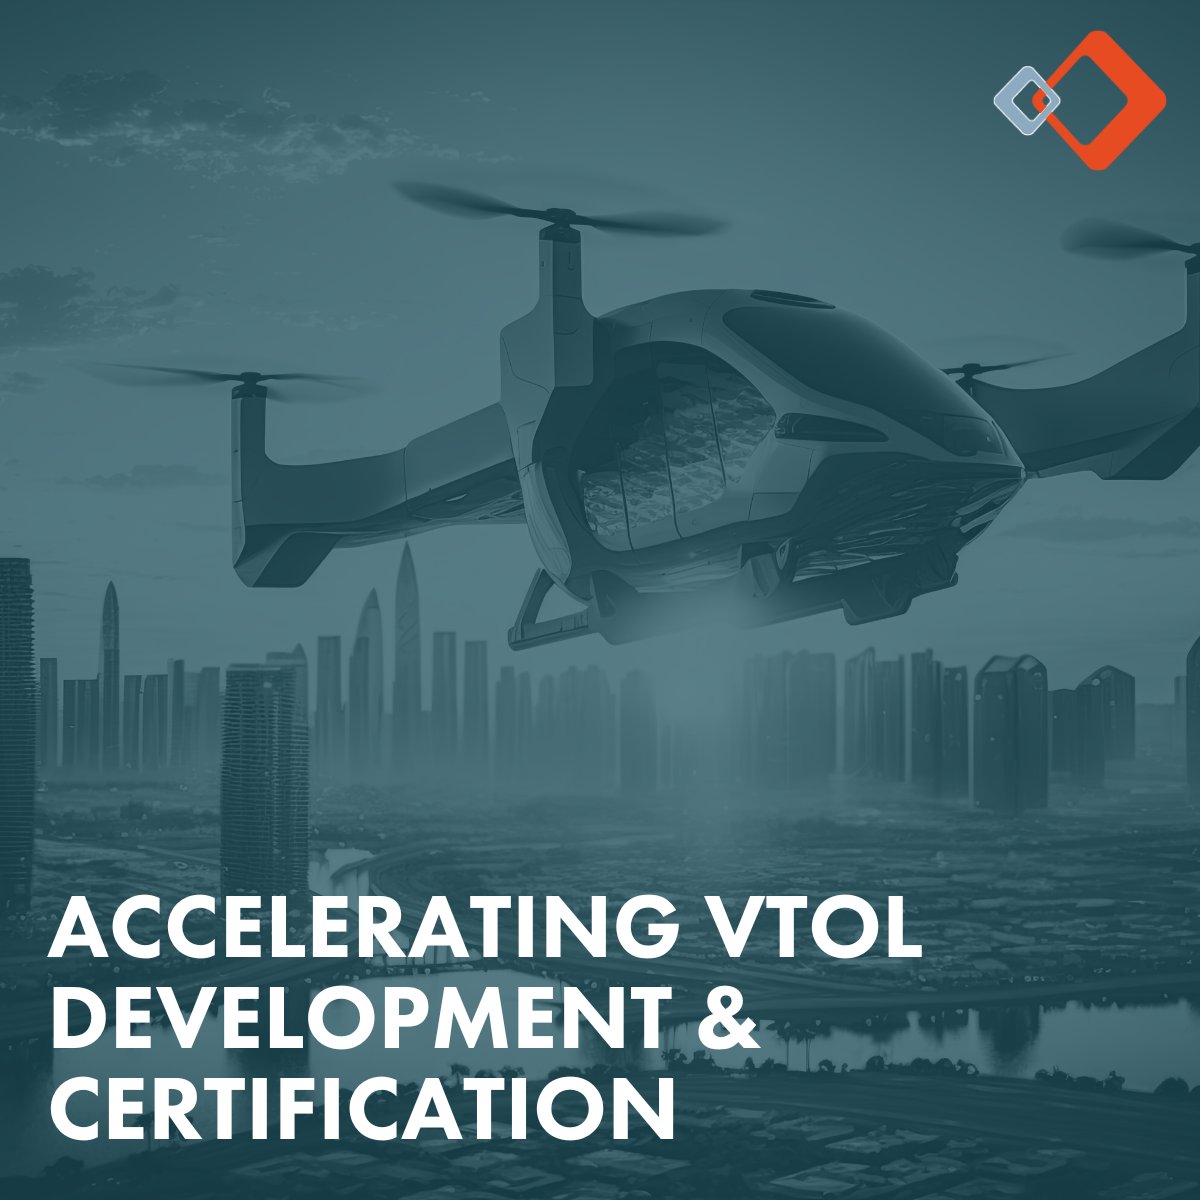 Partner with Performance to accelerate your AAM technology. Visit our website to explore our suite of advanced air mobility solutions and services: ow.ly/8CNh50OEzTj

#AAM #FAAcertification #Evtol #vtol #UAM